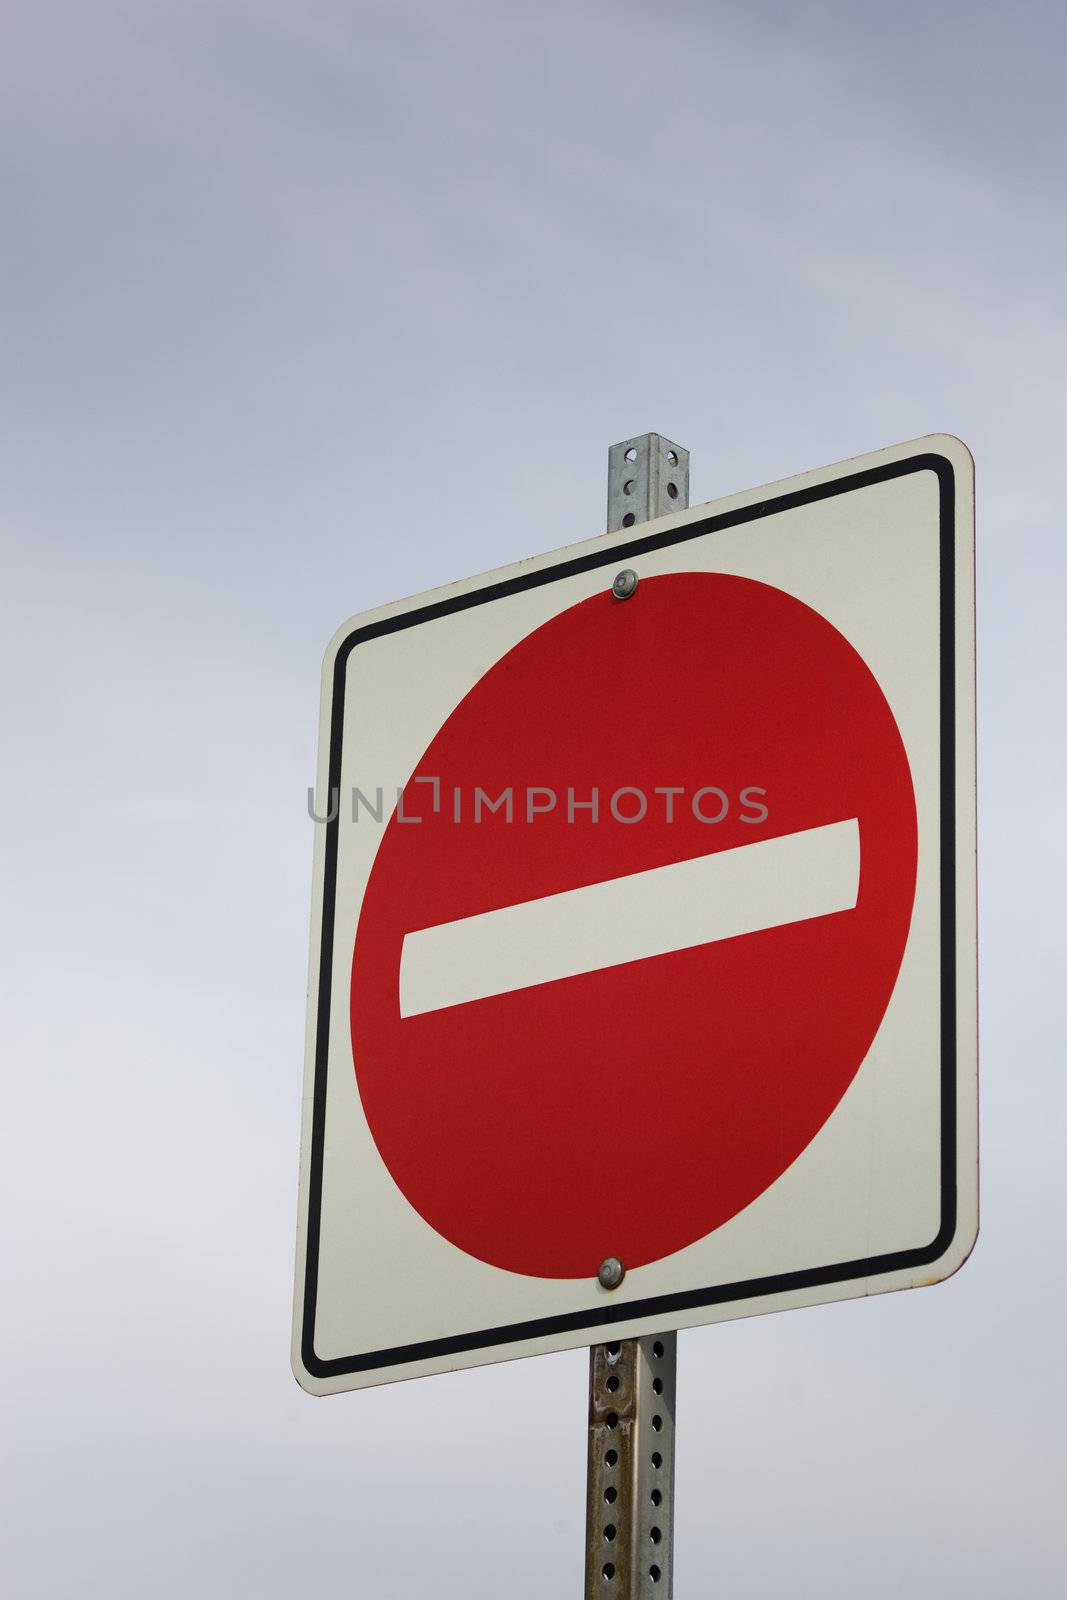 A red no entry sign against a sky background.